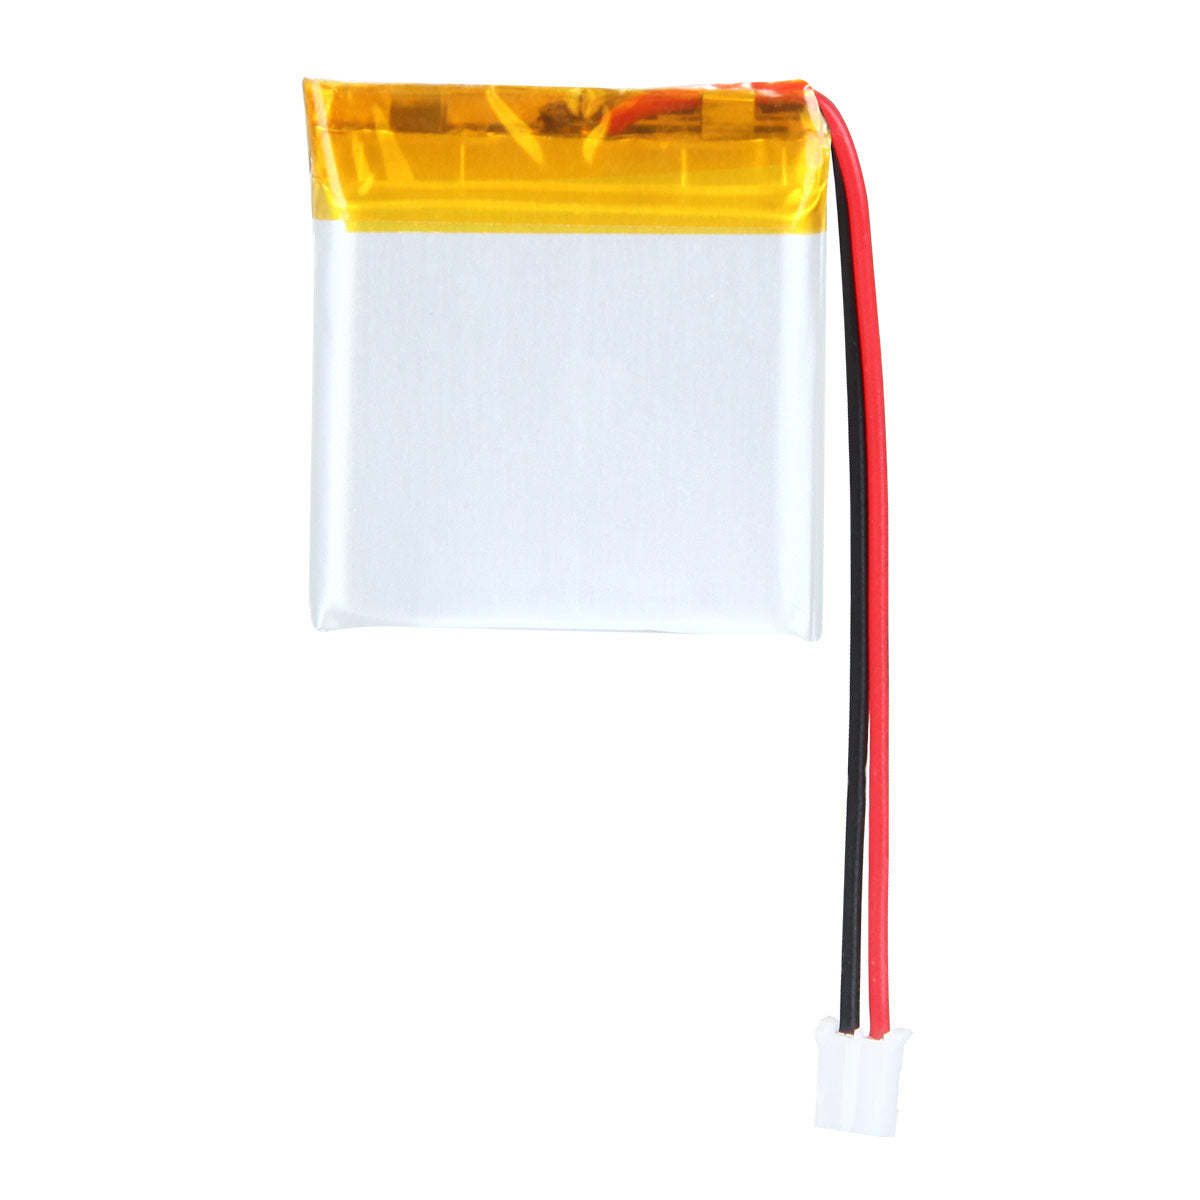 YDL 3.7V 360mAh 403232 Rechargeable Lithium Polymer Battery Length 34mm